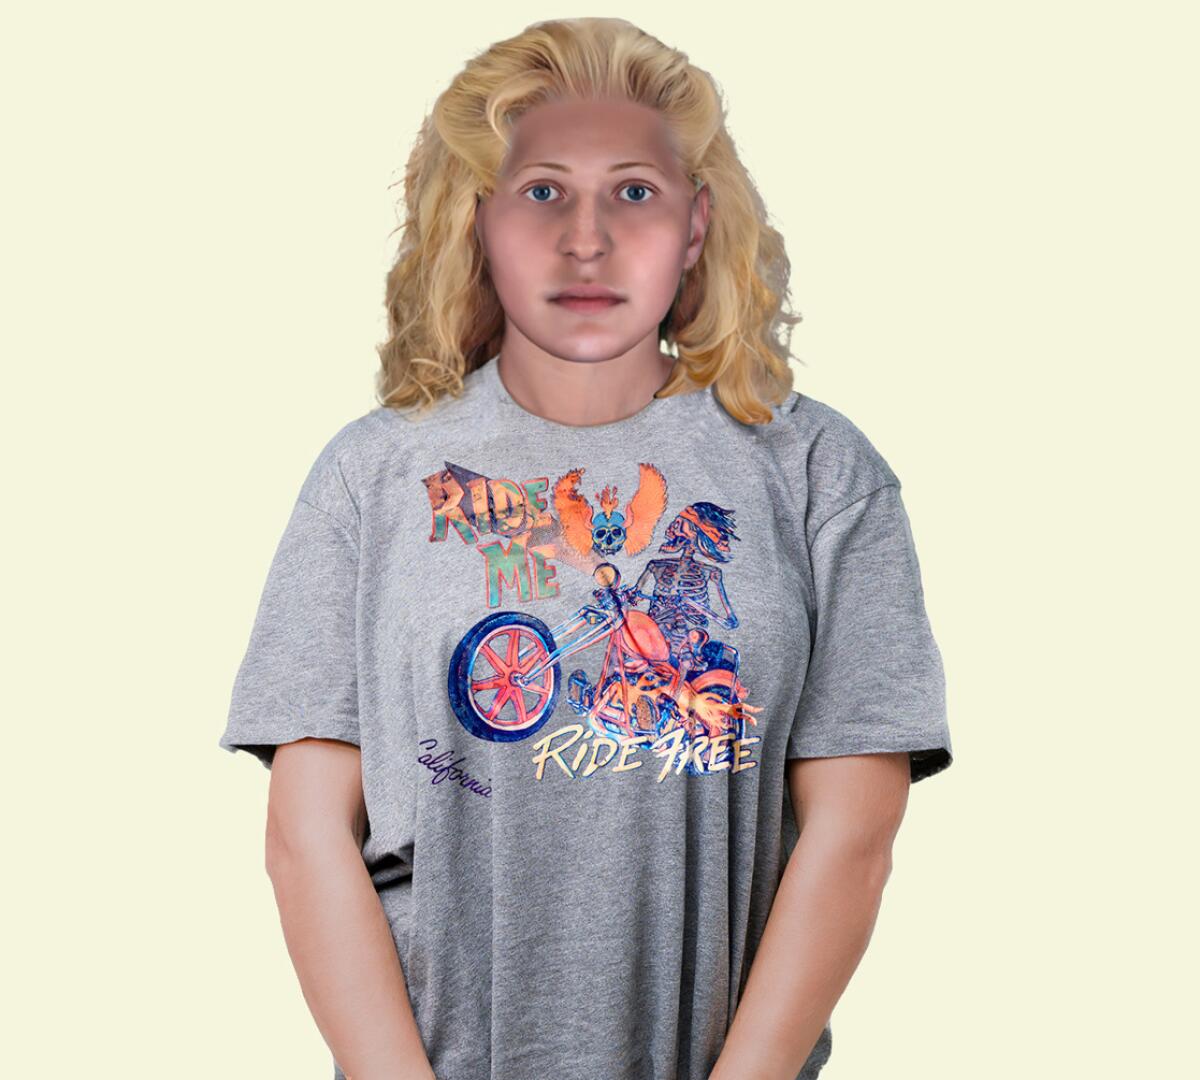 A composite rendering shows a young blond woman in a gray T-shirt.